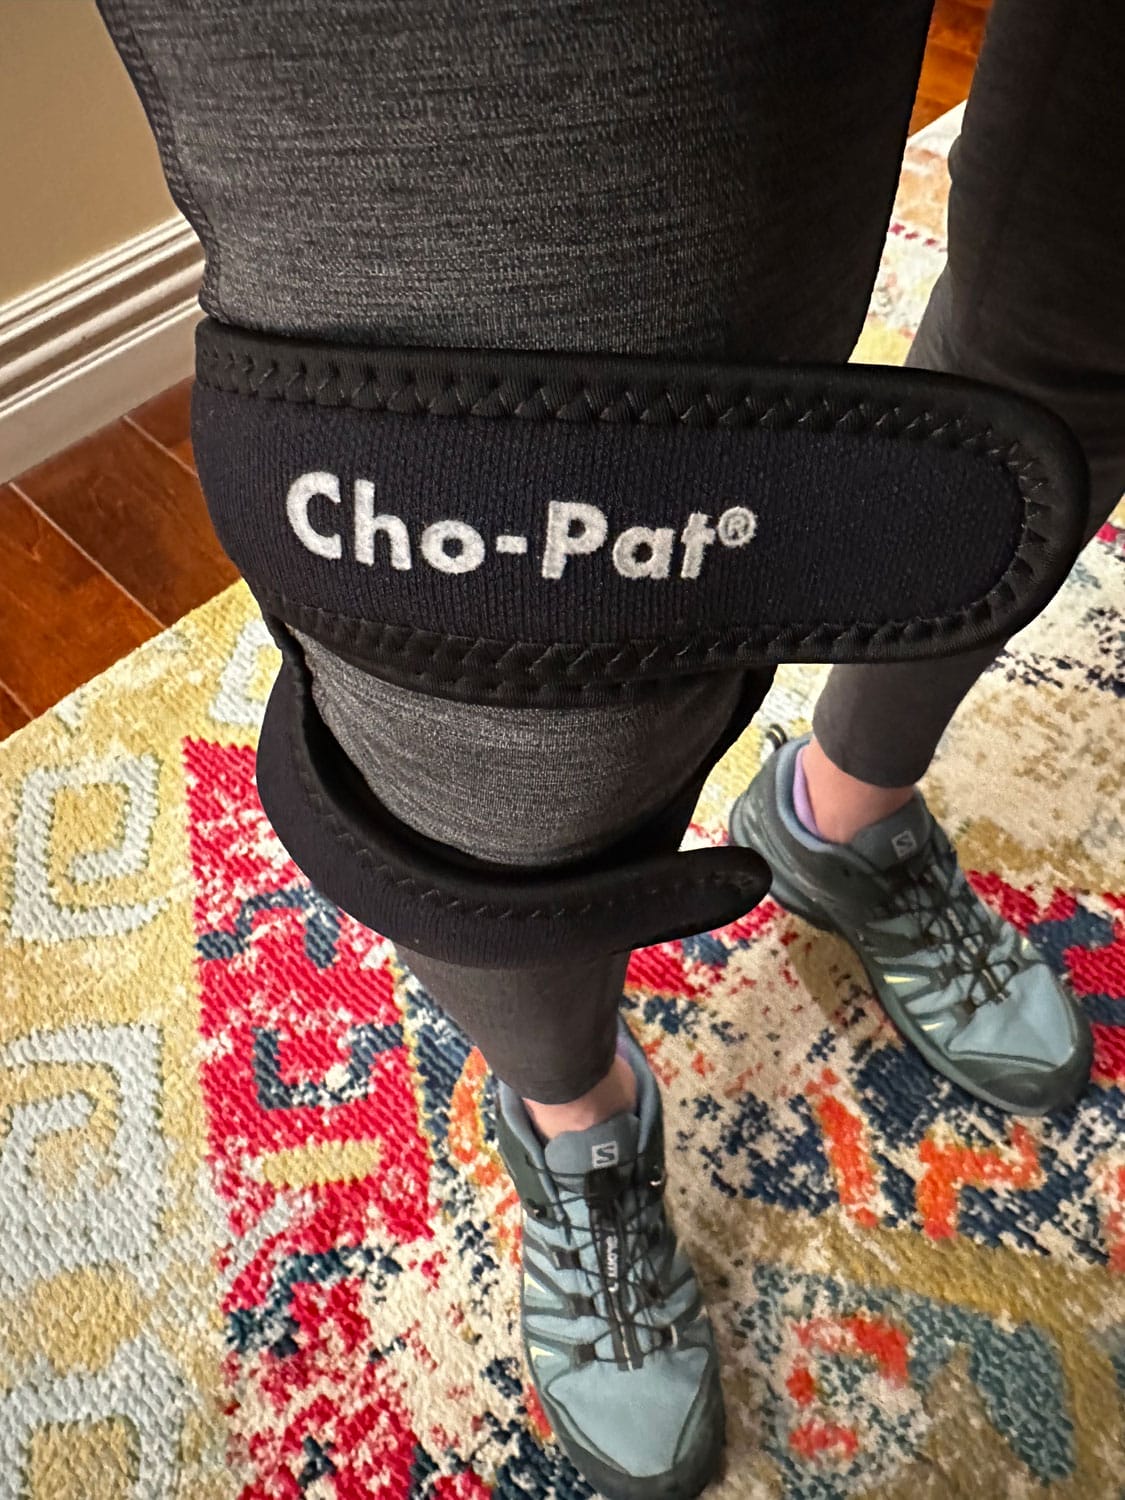 Cho Pat Dual Action Knee Strap Review - A Triathlete's Diary